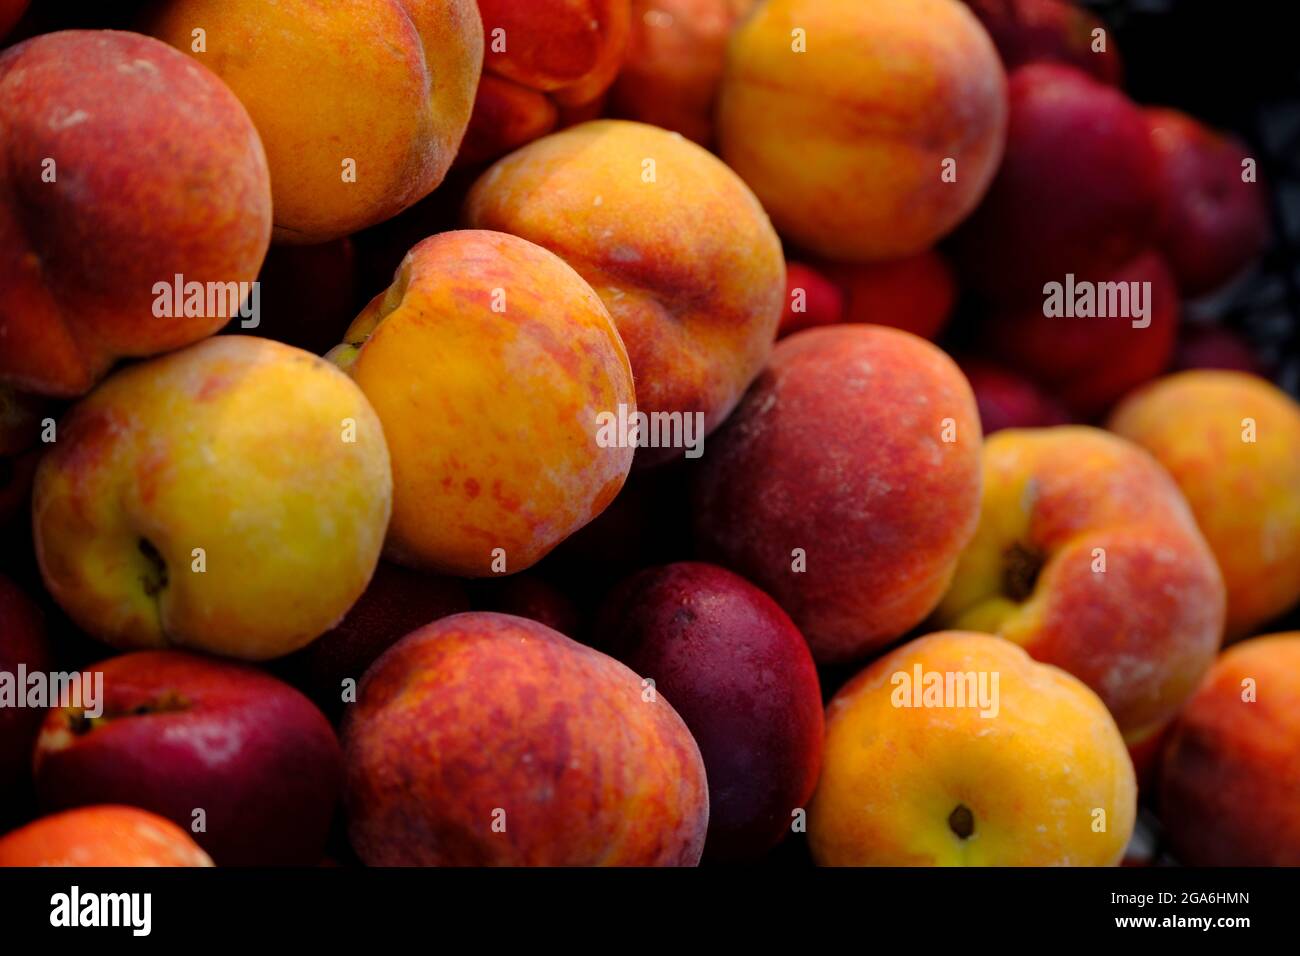 Isolated image of peach Stock Photo